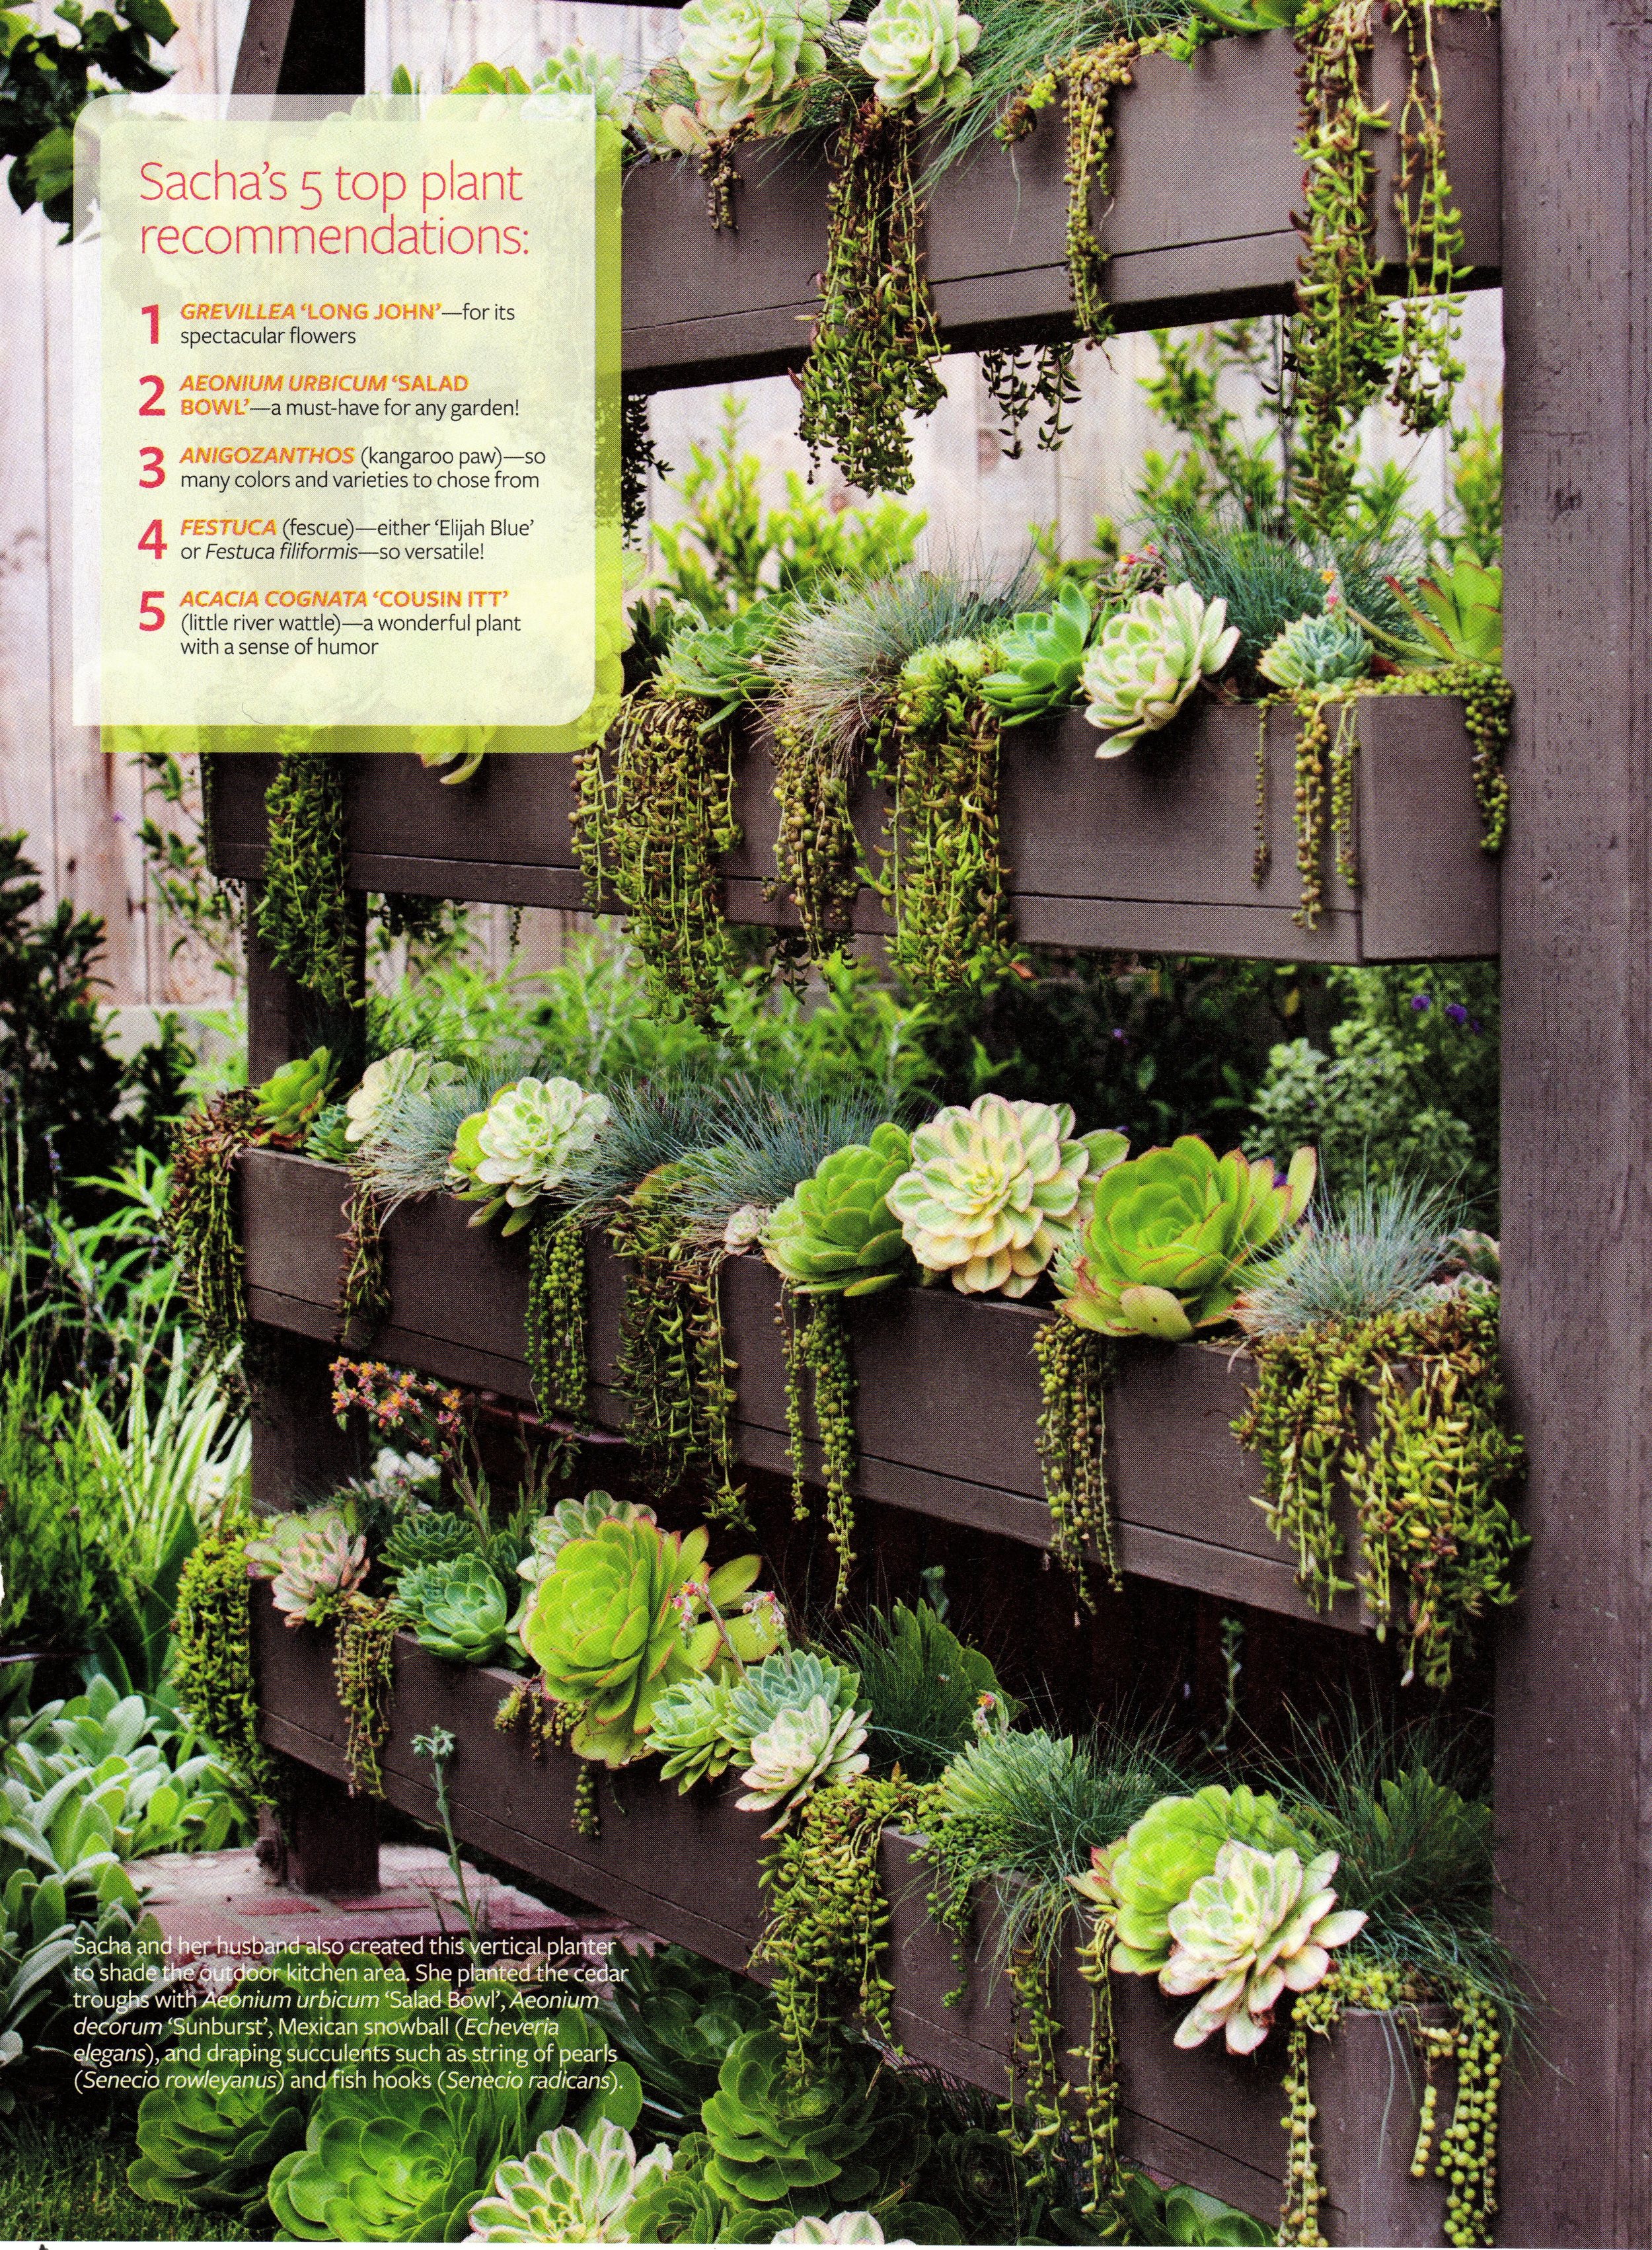 Outdoor Spaces_page 820160320_18263702.jpg